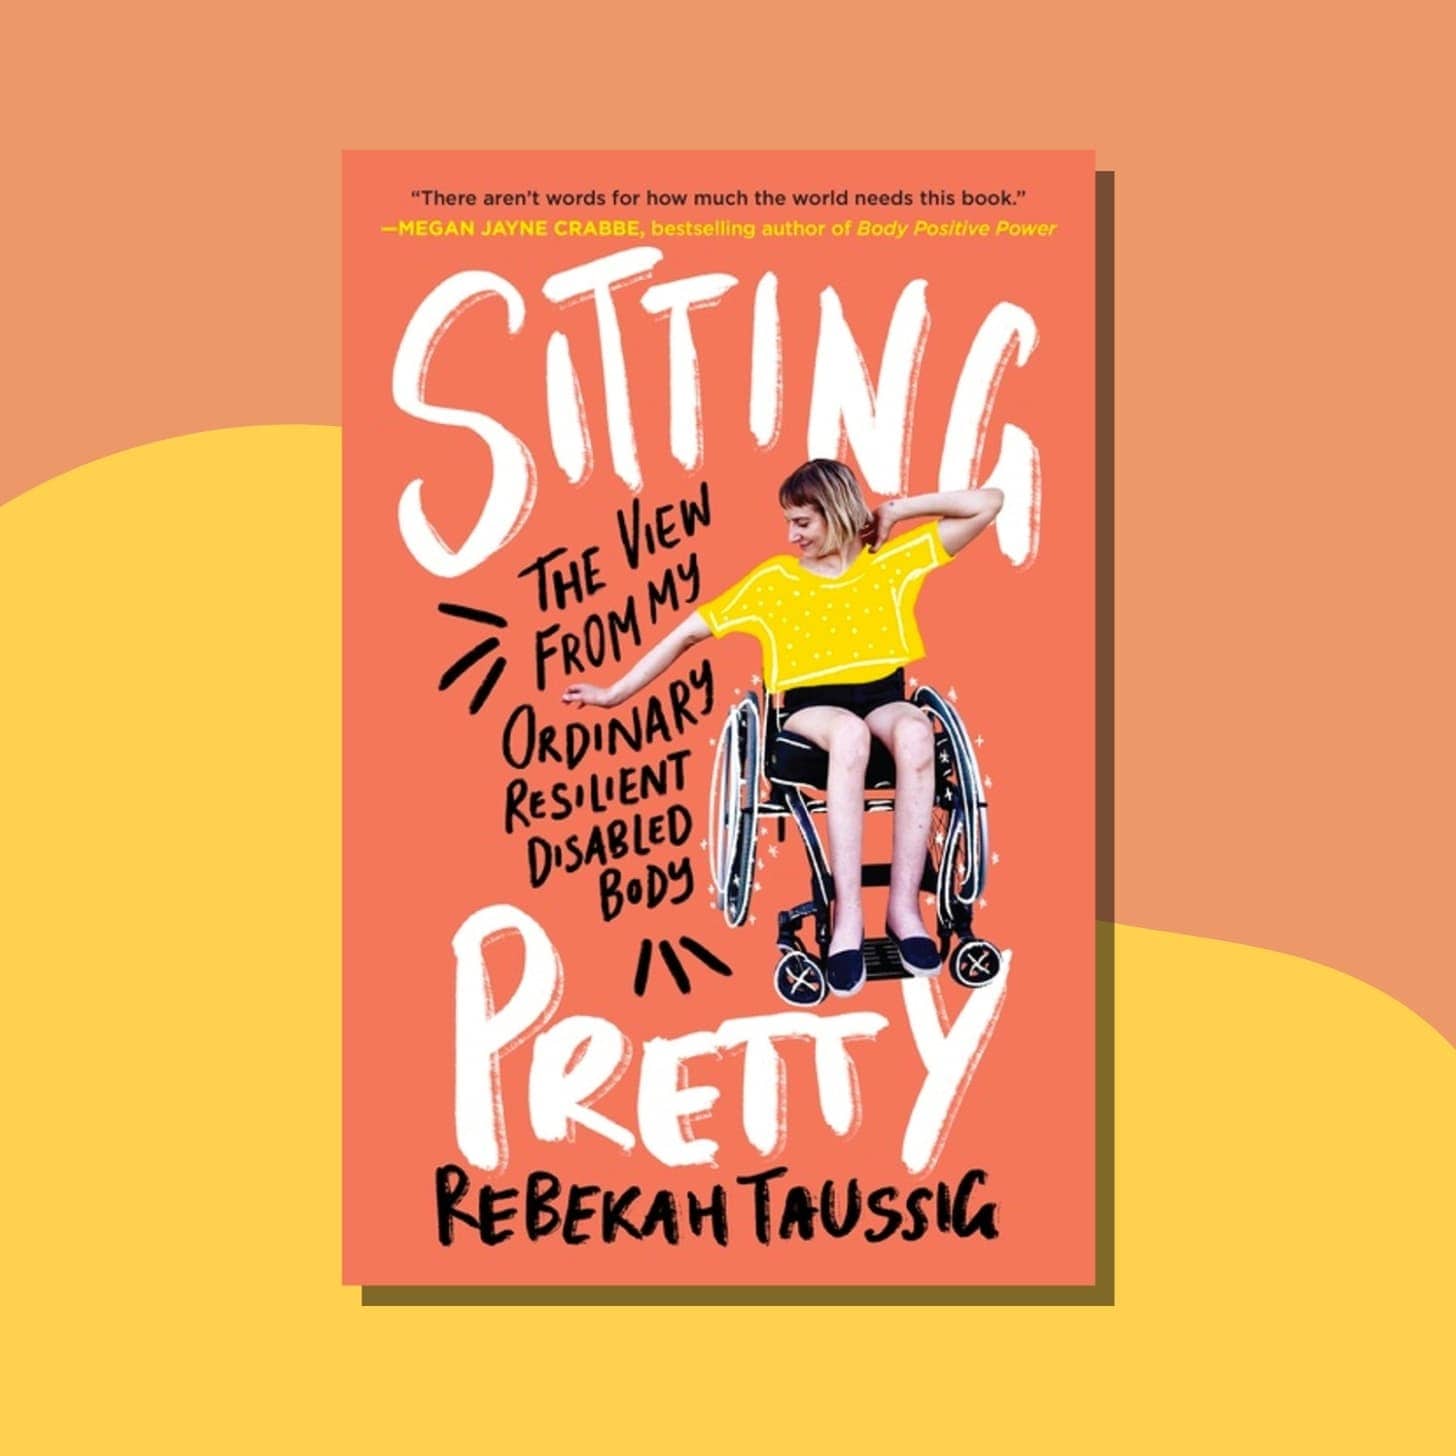 “Sitting Pretty: The View from My Ordinary, Resilient, Disabled Body” by Rebekah Taussig